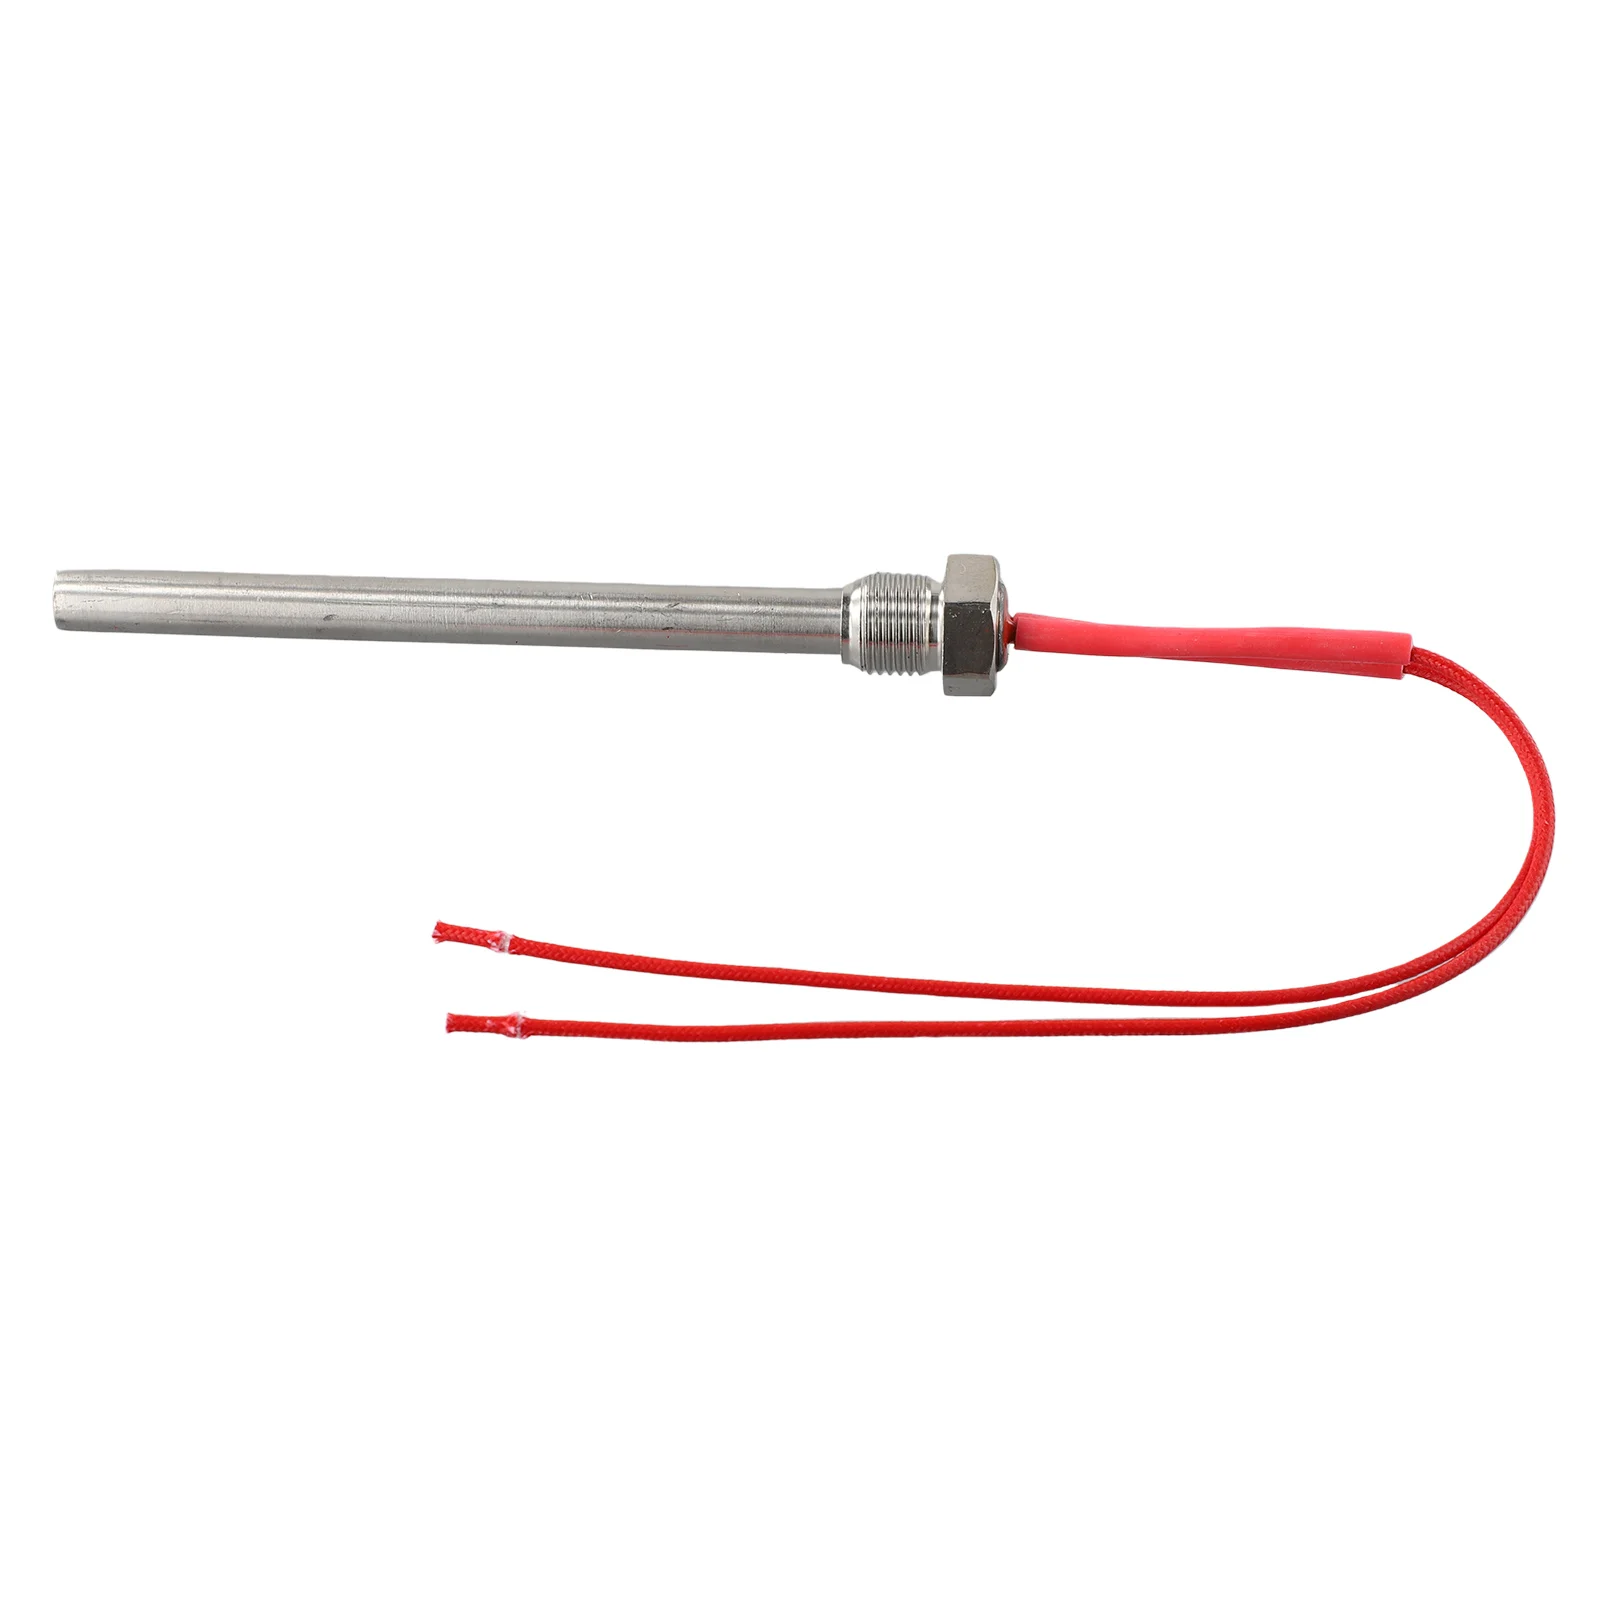 

1 Pcs Igniter Hot Rod 220V Wood Pellet Heating Tube Lgniter For Fireplace Grill Stove Part Household Warming Supplies